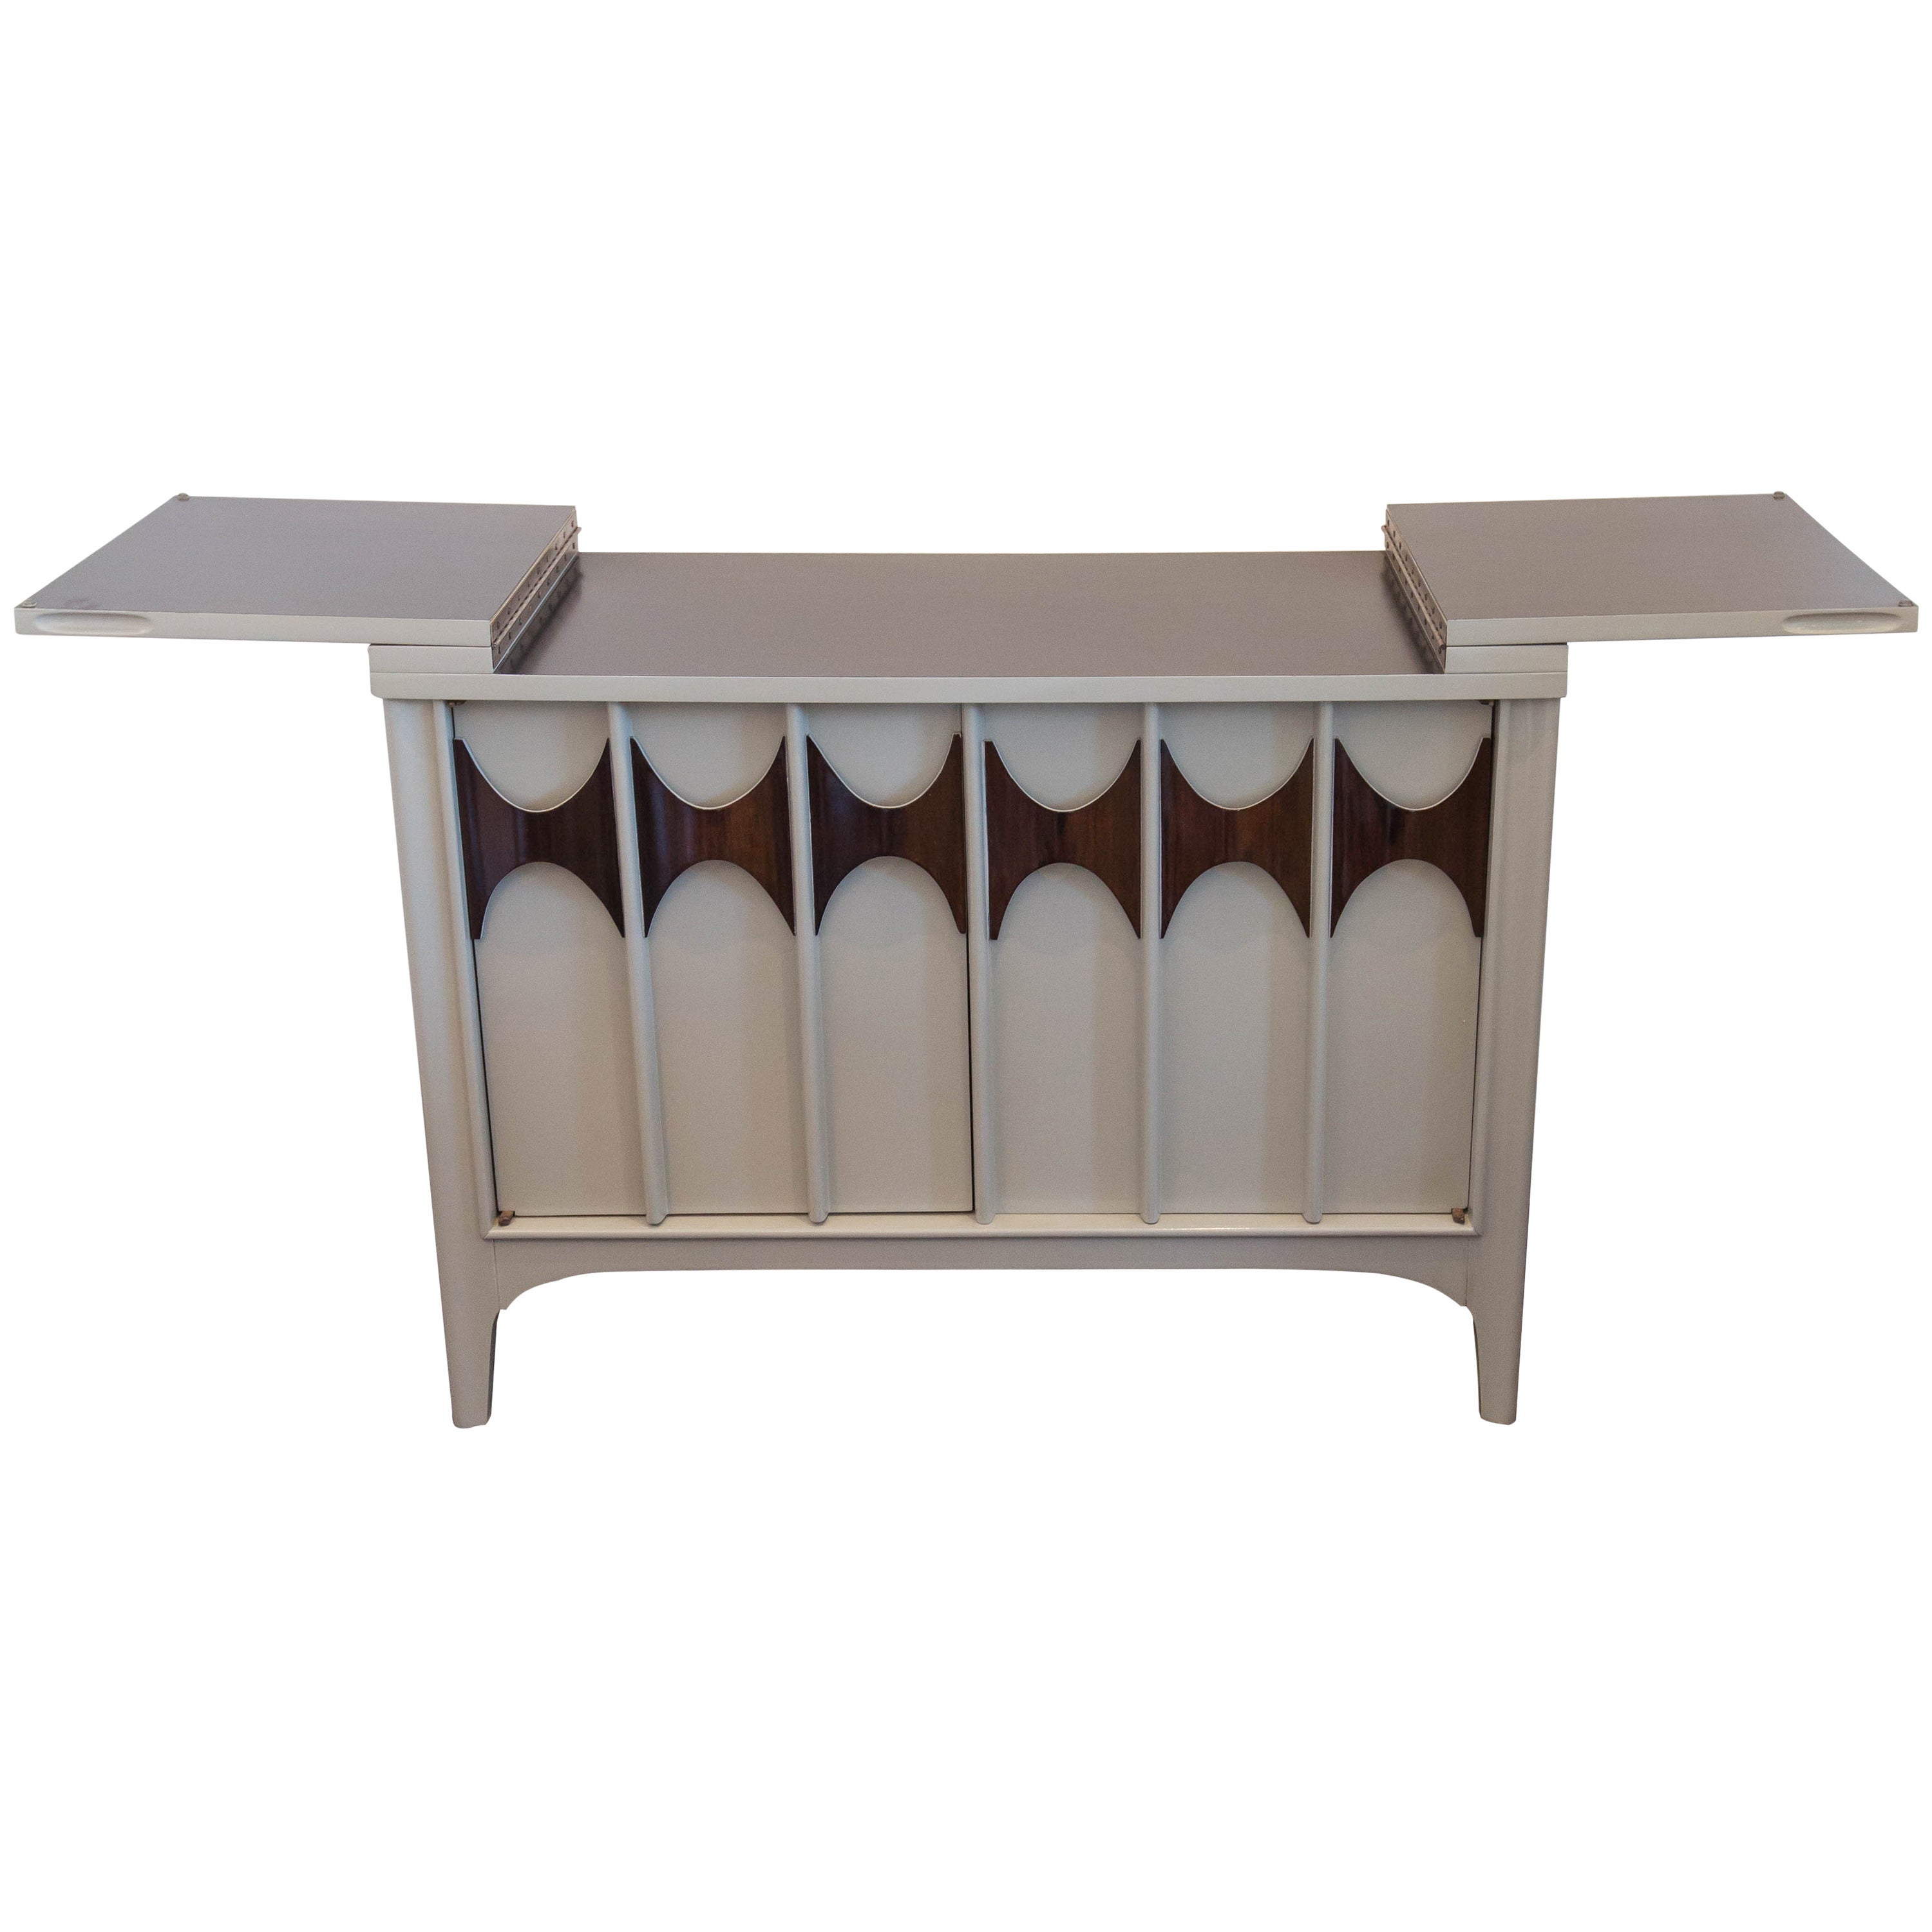 Kent Coffey Perspecta Server or Bar in Grey Lacquer